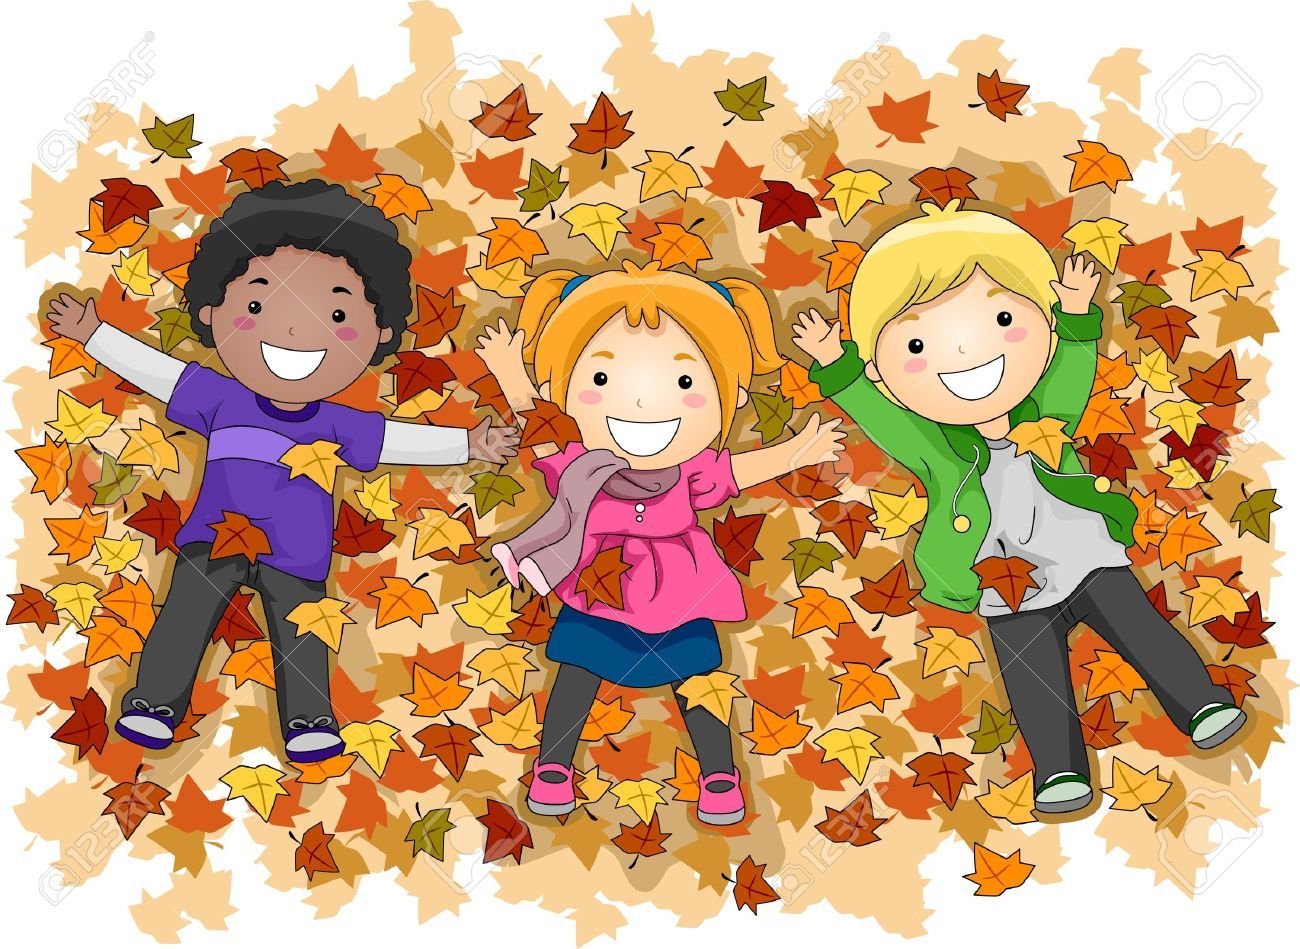 Illustration Of Kids Playing With Autumn Leaves Stock Photo